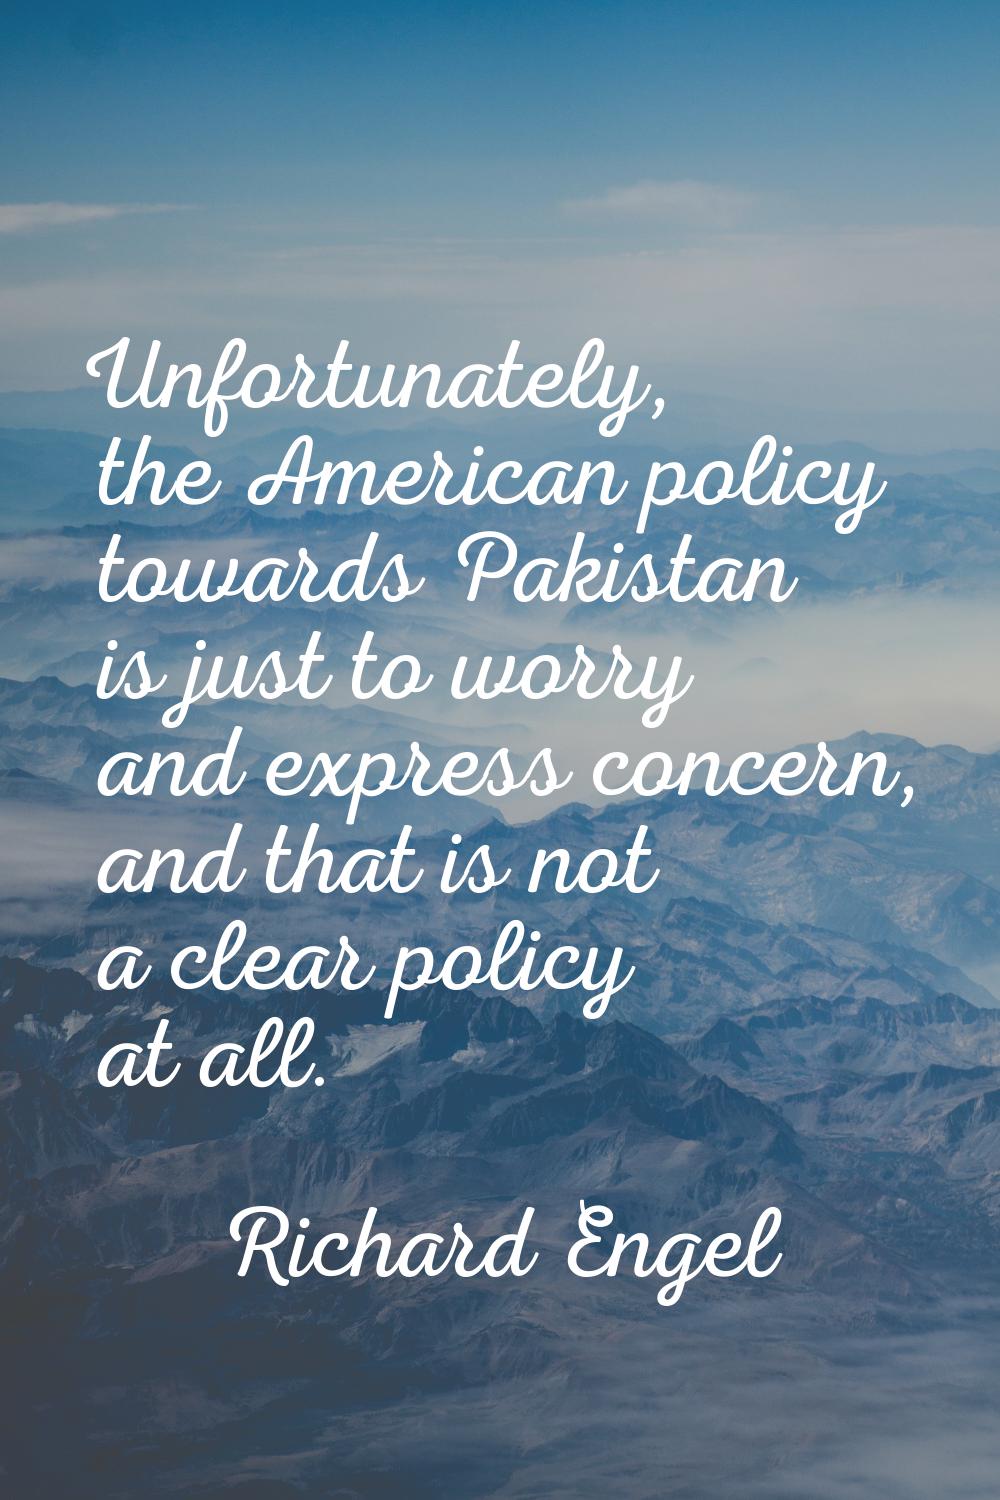 Unfortunately, the American policy towards Pakistan is just to worry and express concern, and that 